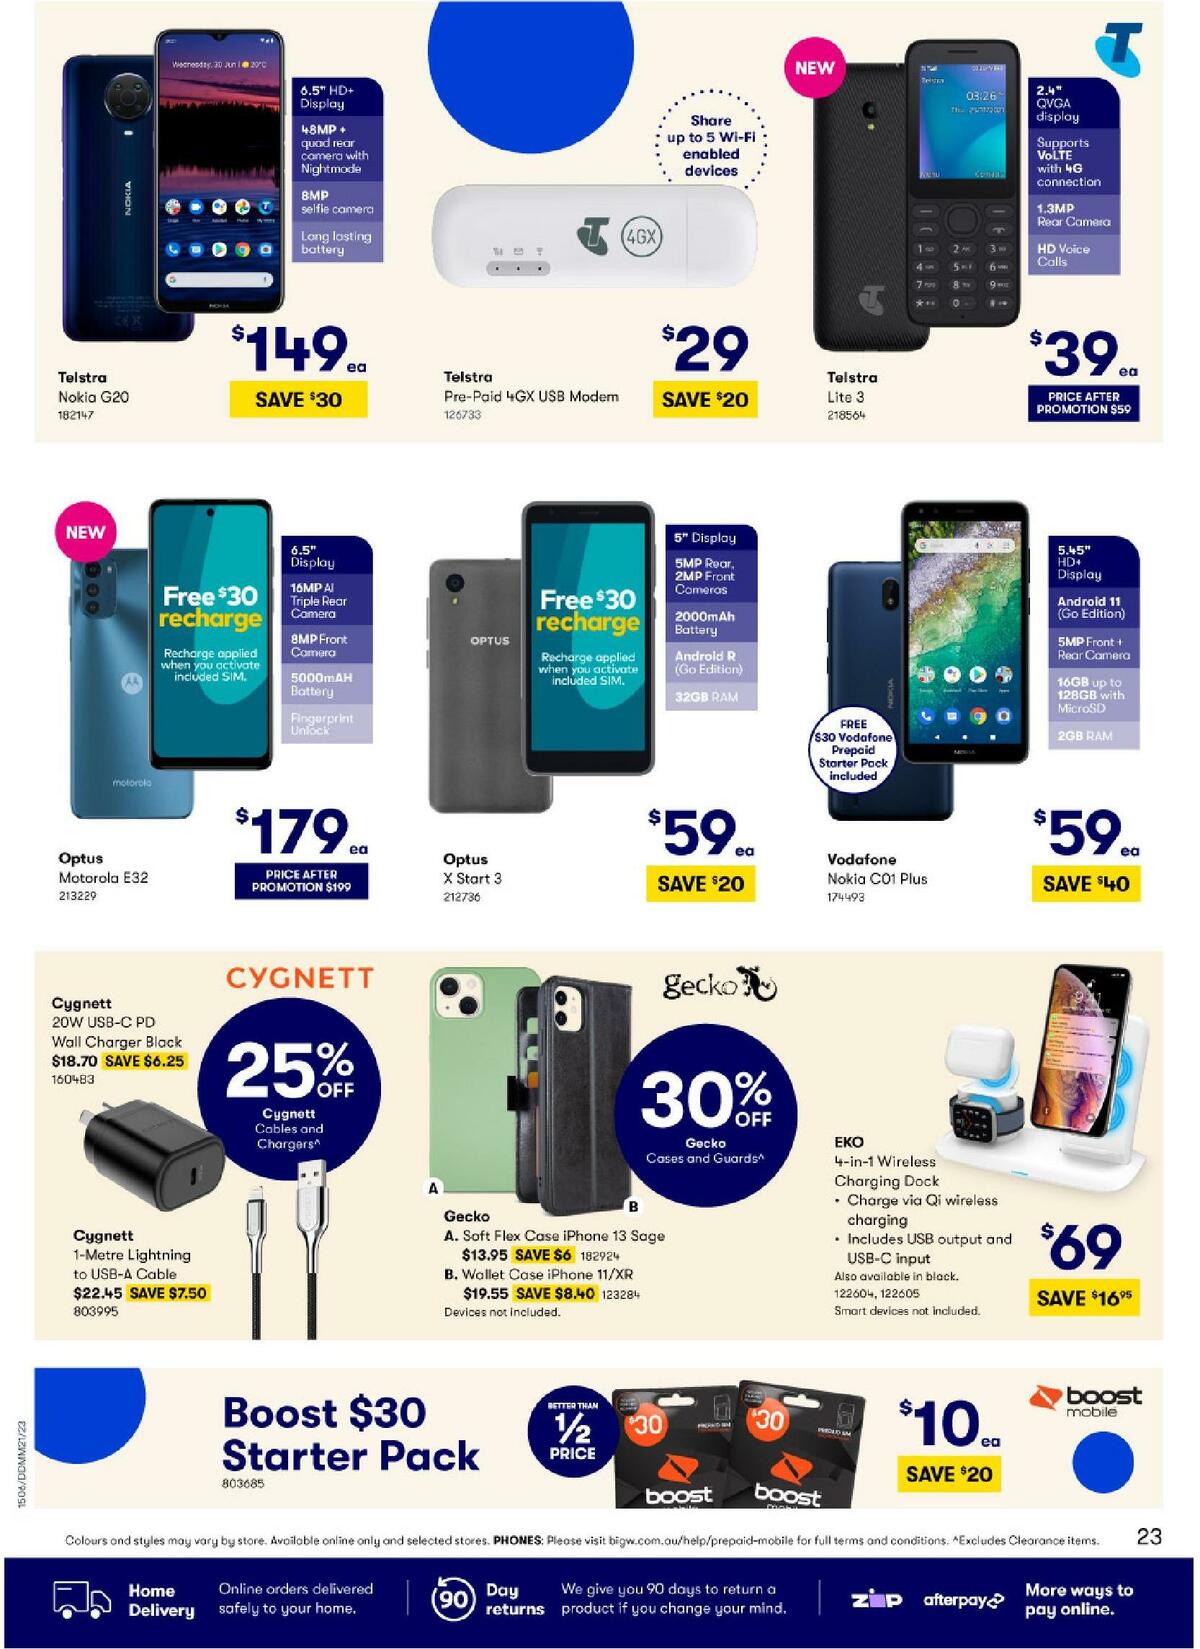 Big W Catalogues from 30 June